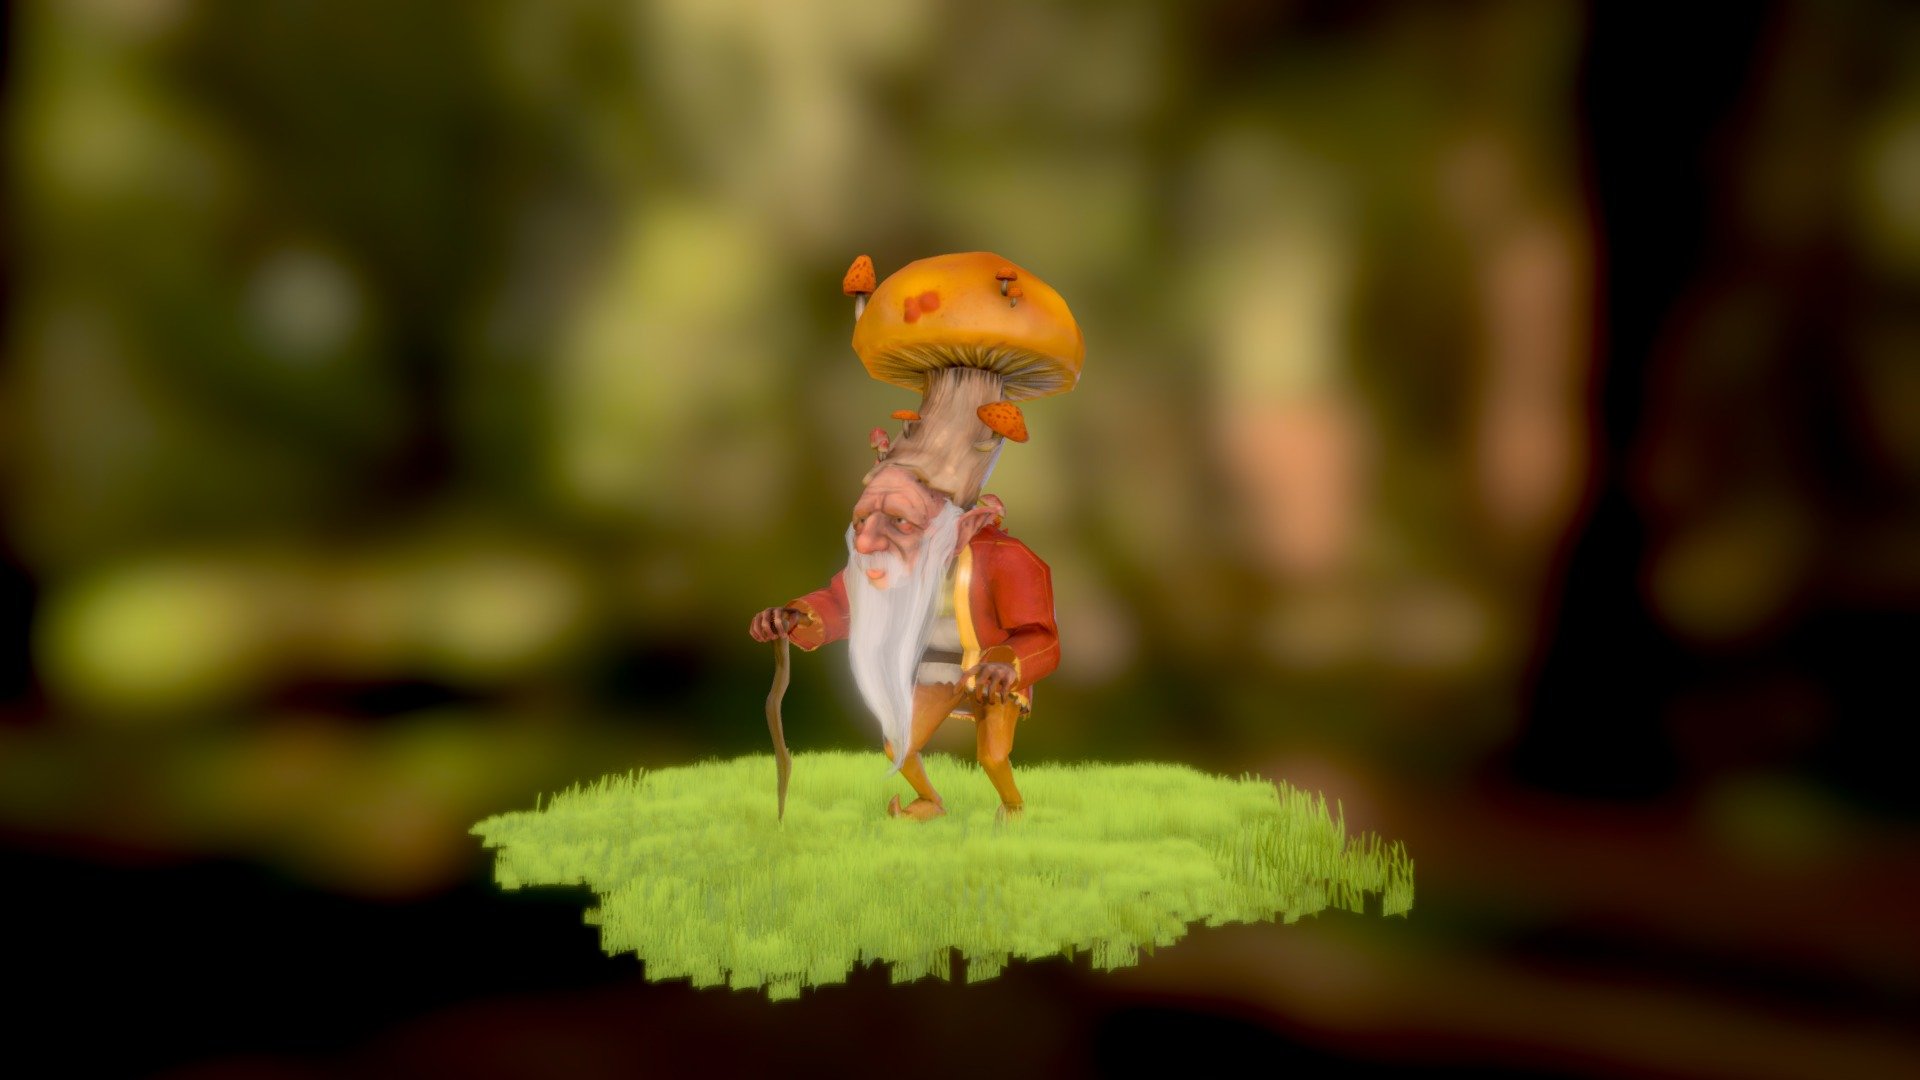 A character created for an assignment at AIE - The Mushroom King - 3D model by greta.m 3d model